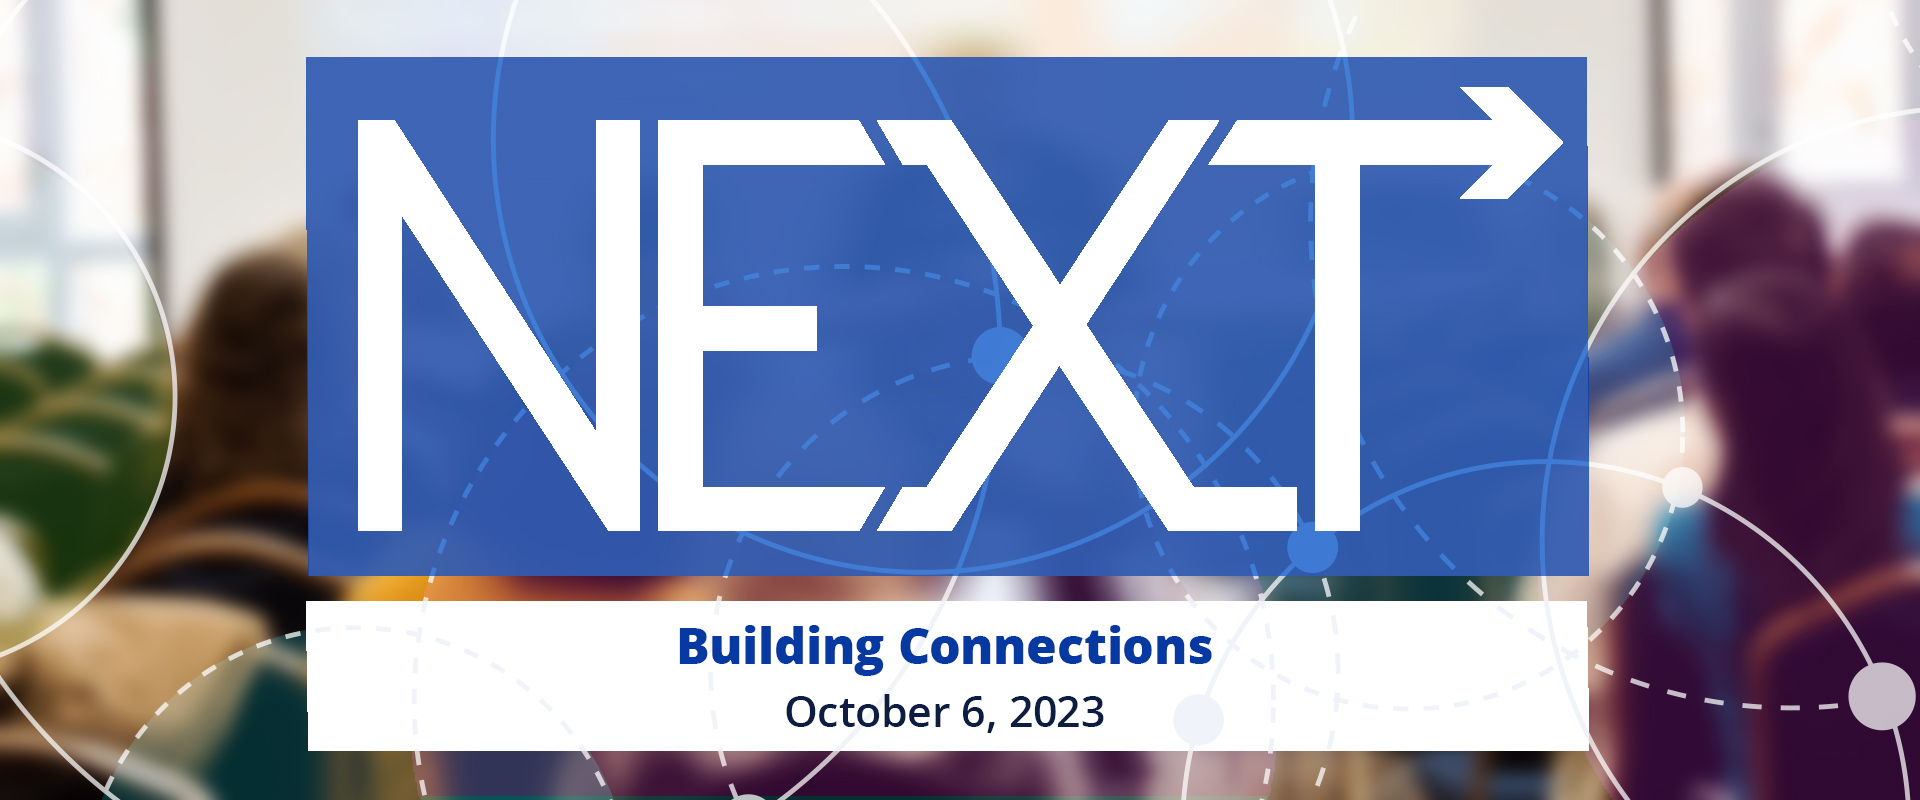 NEXT 2023 - Building Connections - October 6, 2023